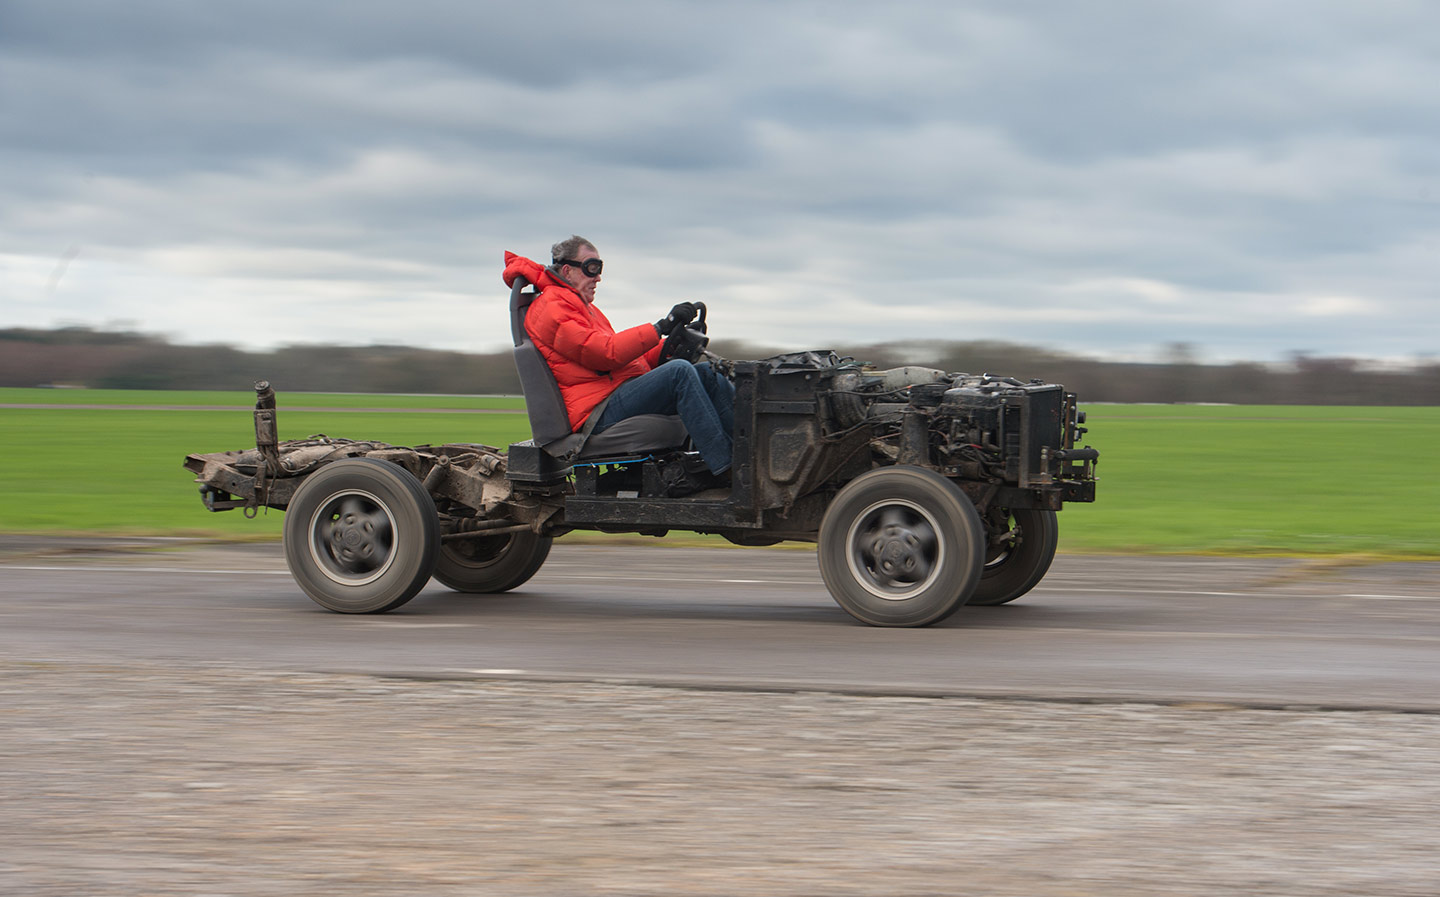 NAKED FRAME Clarkson at the wheel of “the Excellent”, a tractor-derived SUV